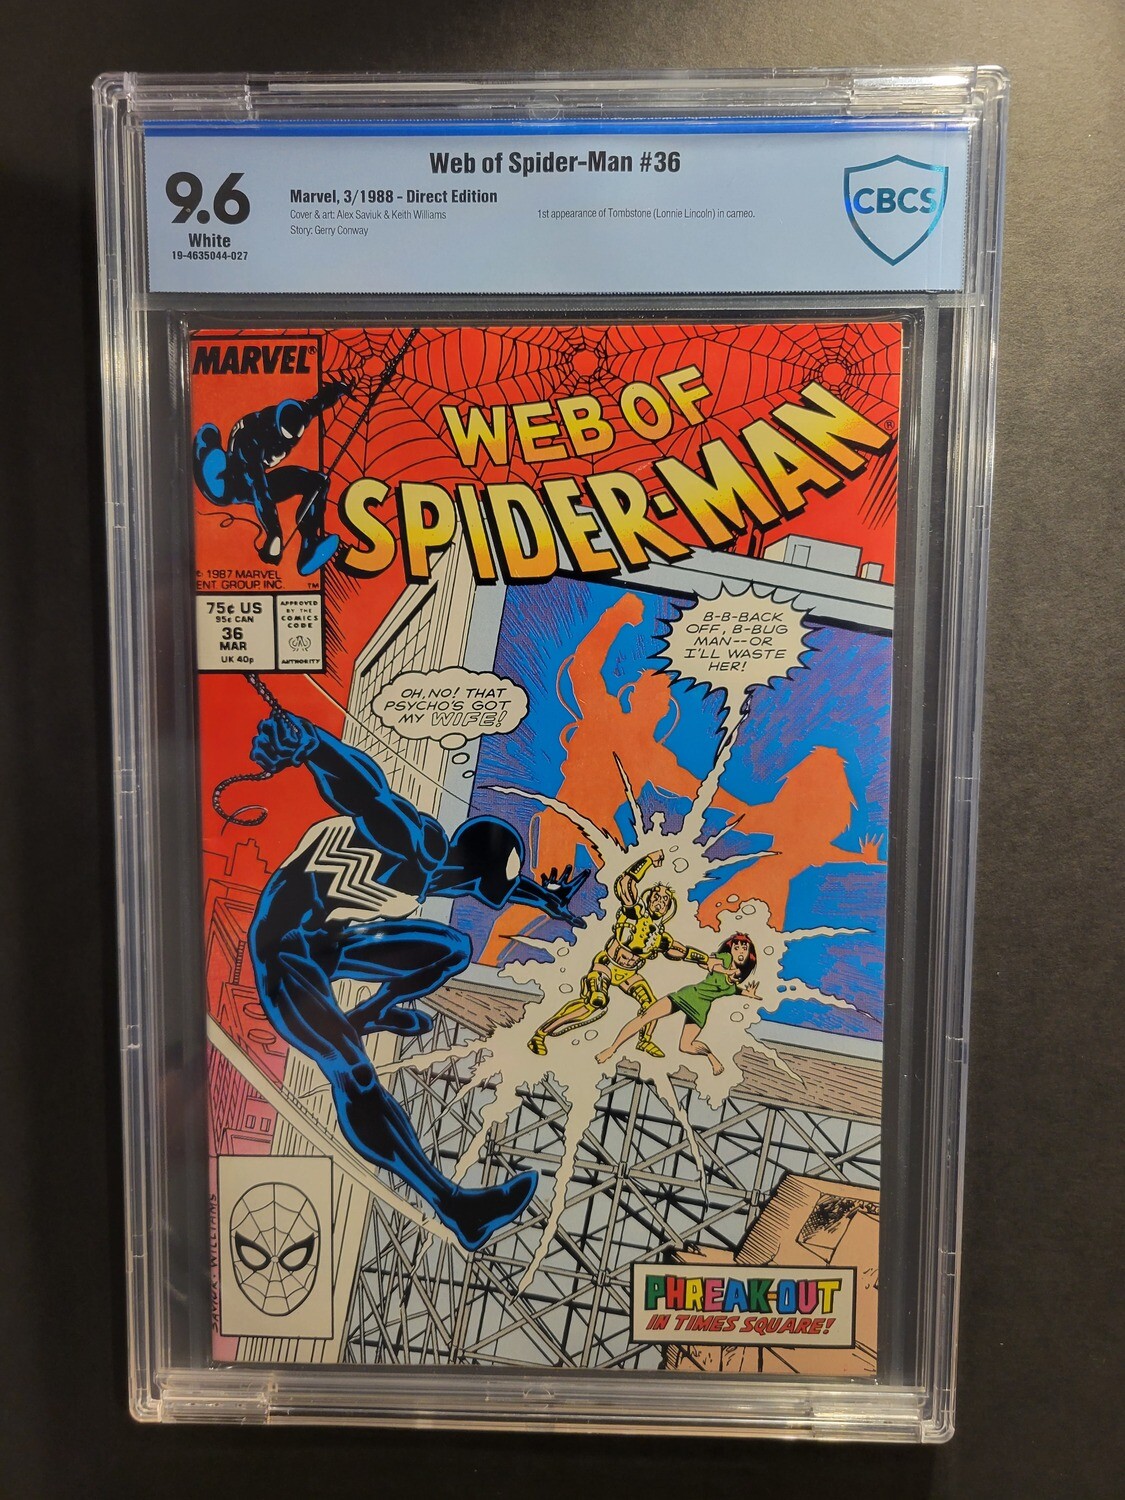 Web of Spider-Man #36 CBCS 9.6 1st appearance of Tombstone